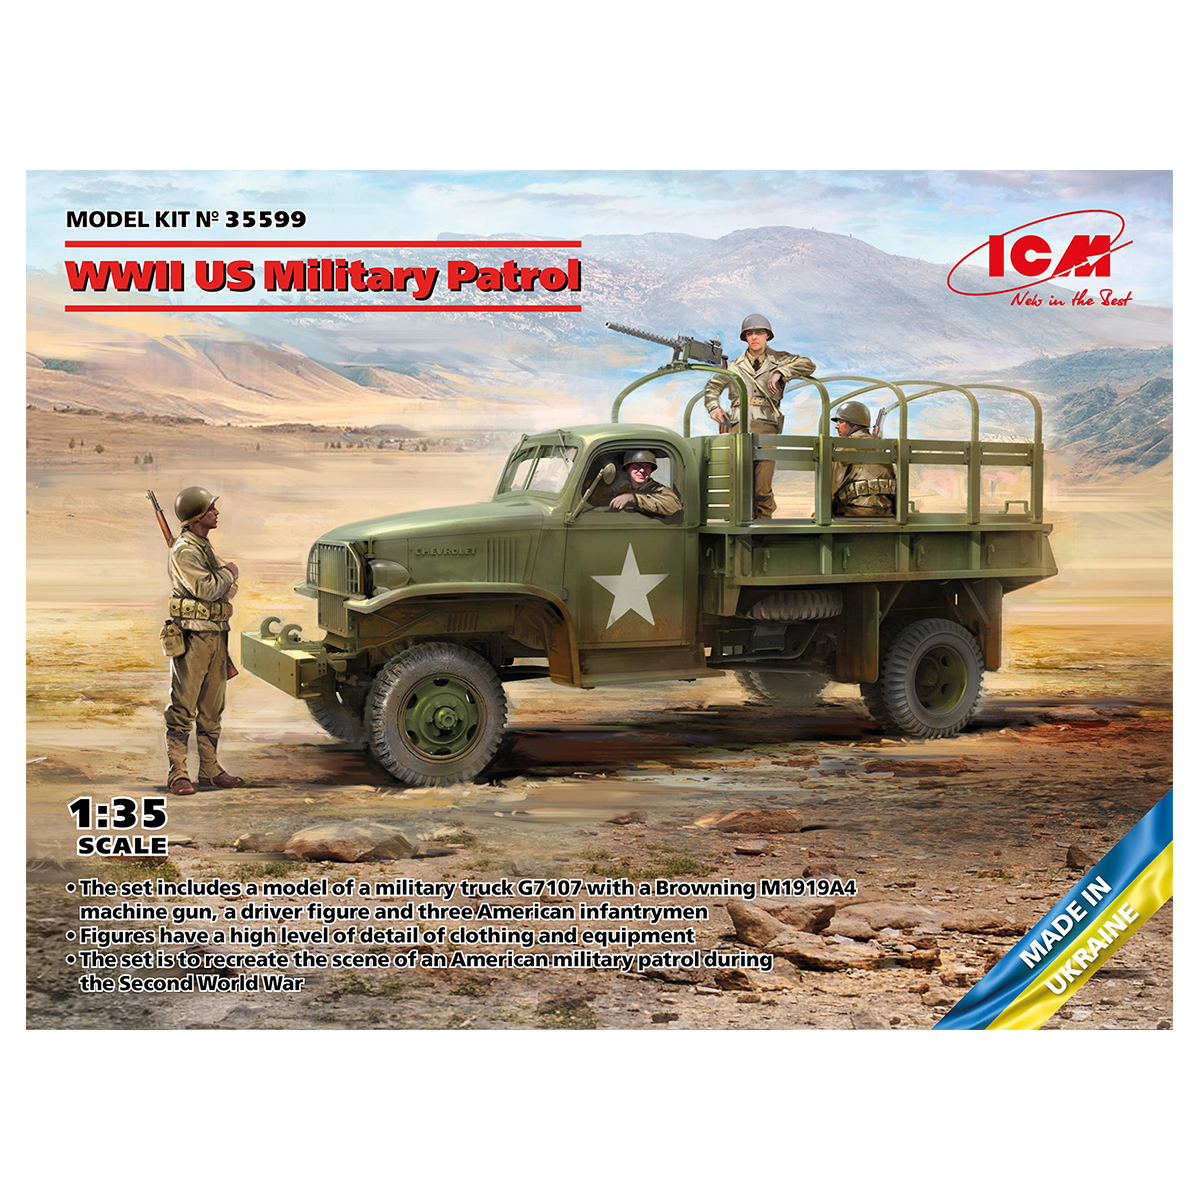 WWII US Military Patrol (G7107 with MG M1919A4) 1/35